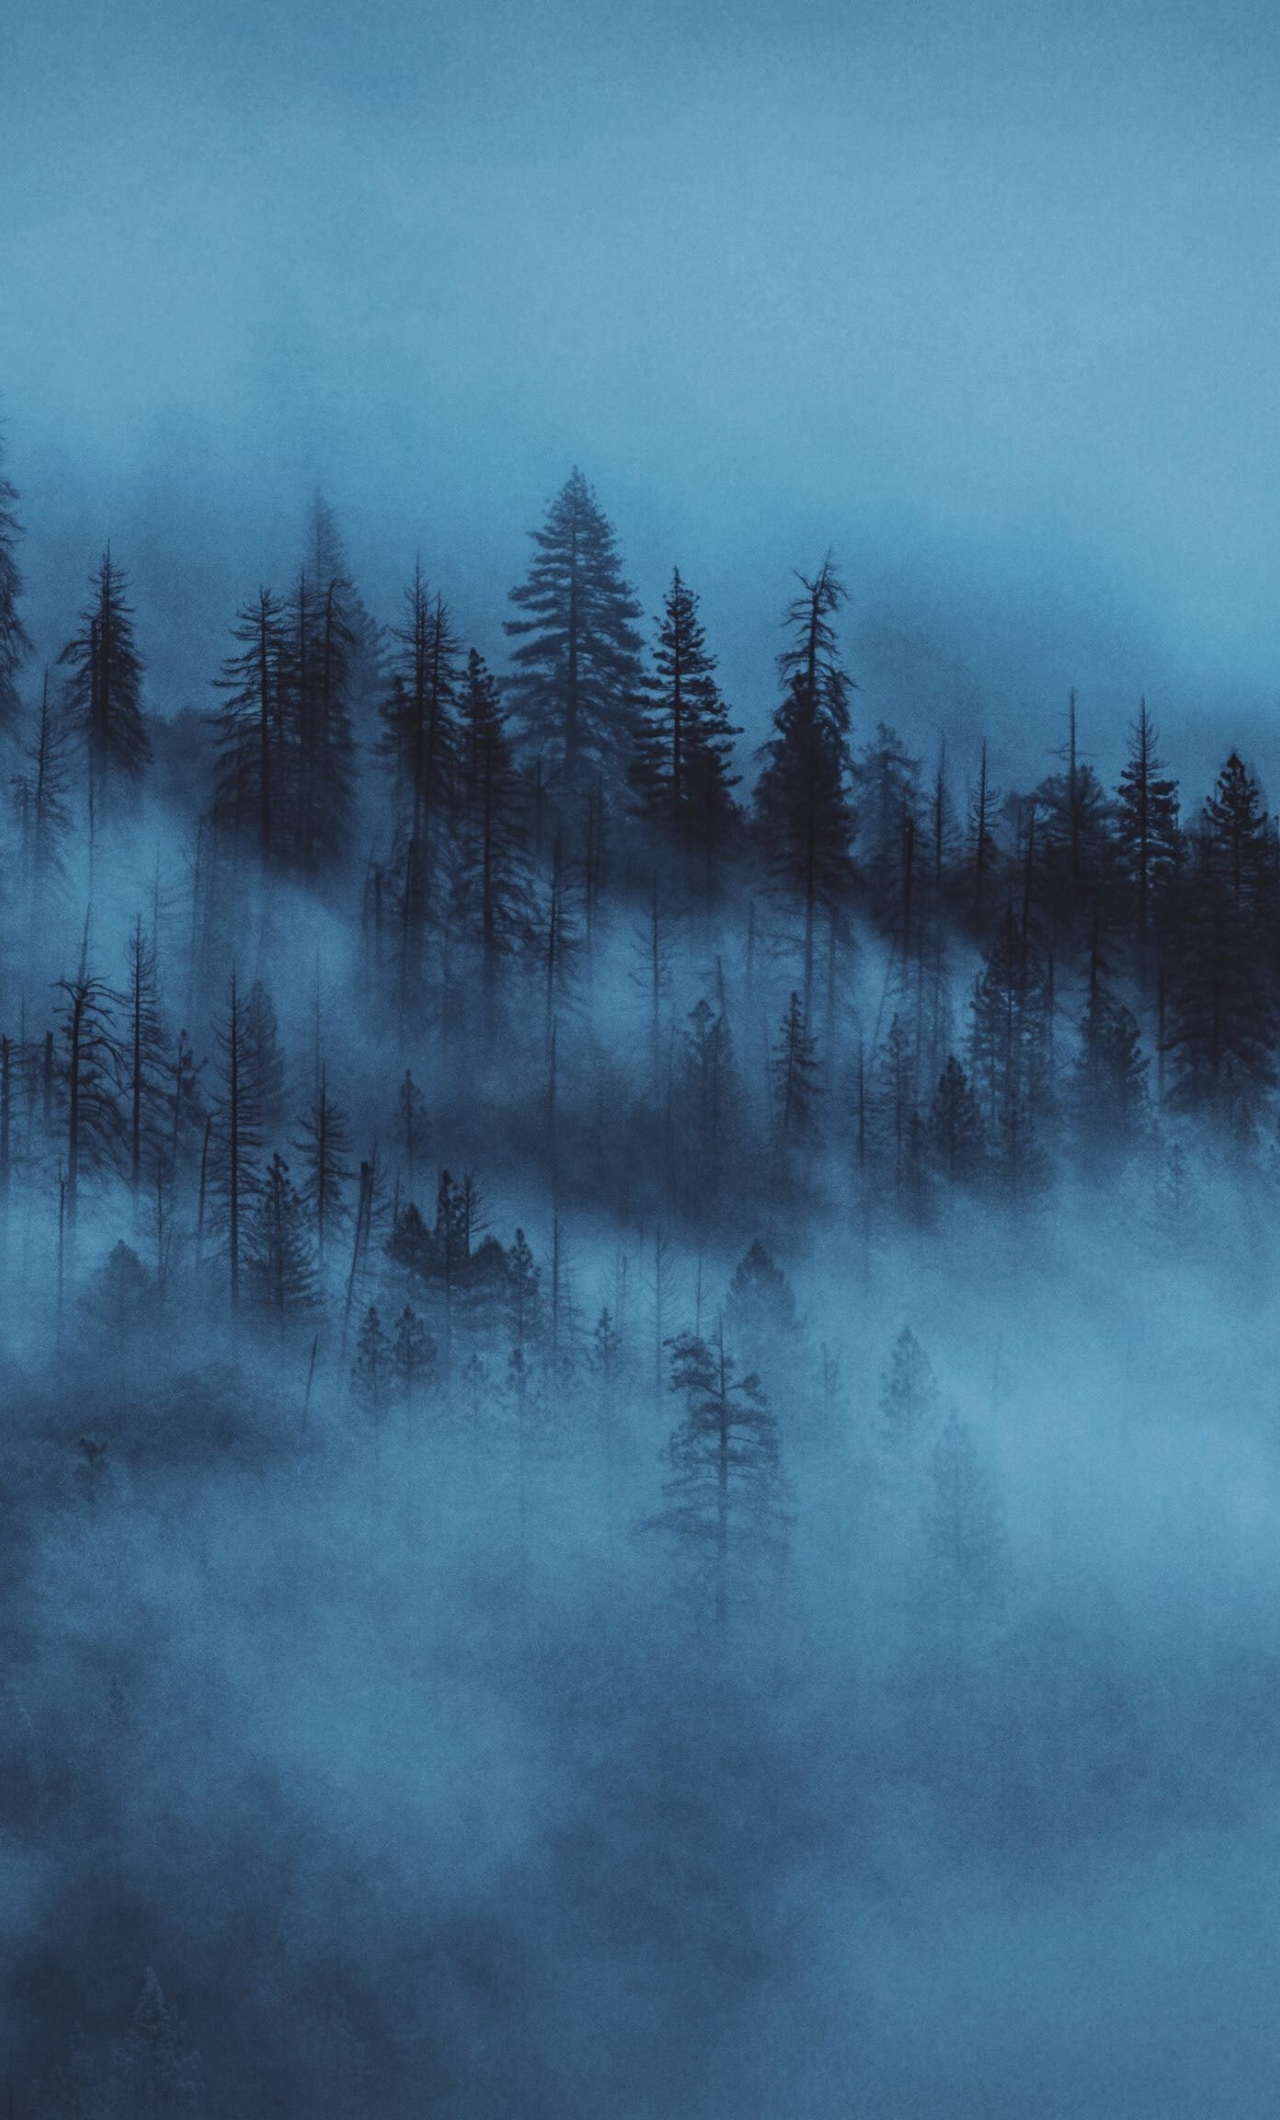 Download wallpaper 938x1668 forest fog dark trees gloomy iphone  876s6 for parallax hd background